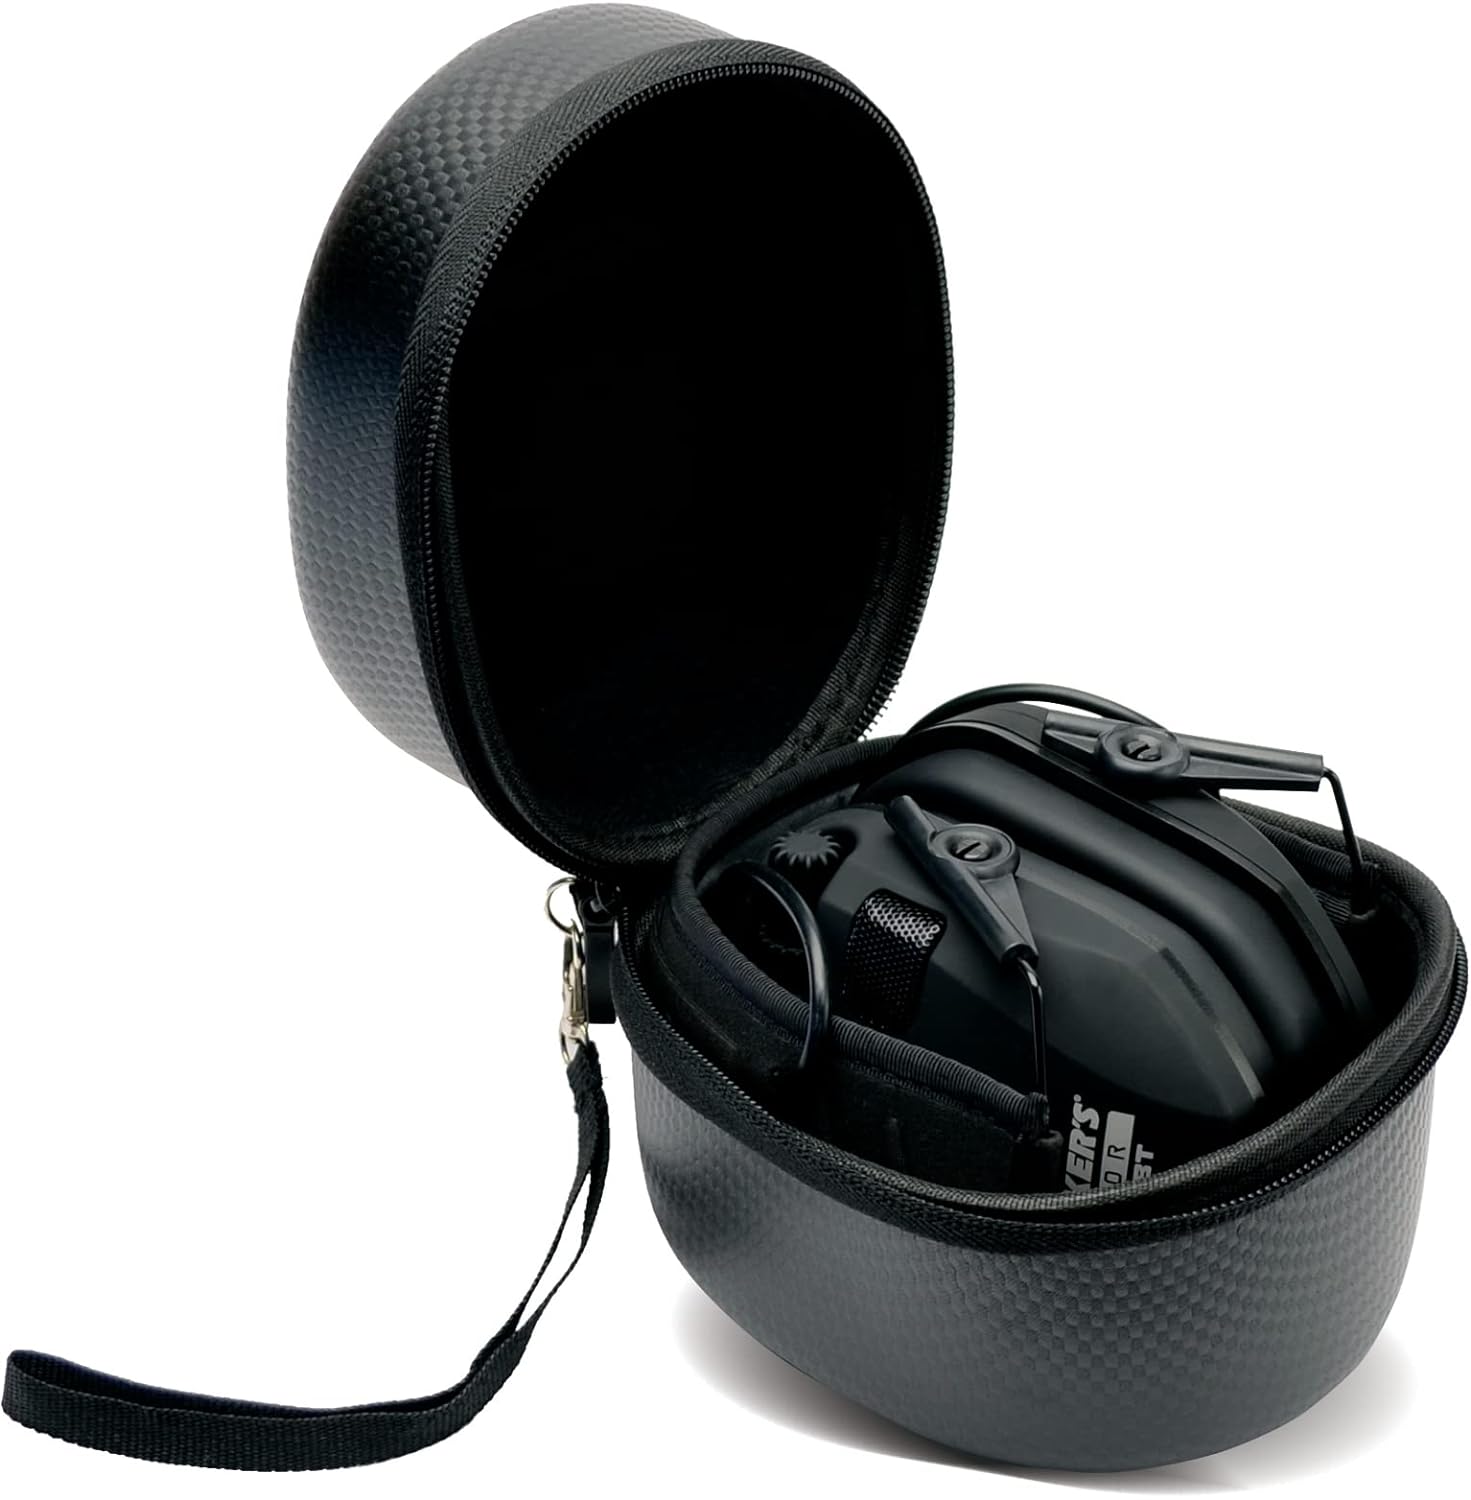 Walkers Razor Slim Electronic Shooting Hearing Protection Muff (Sound Amplification and Suppression) with Protective Case